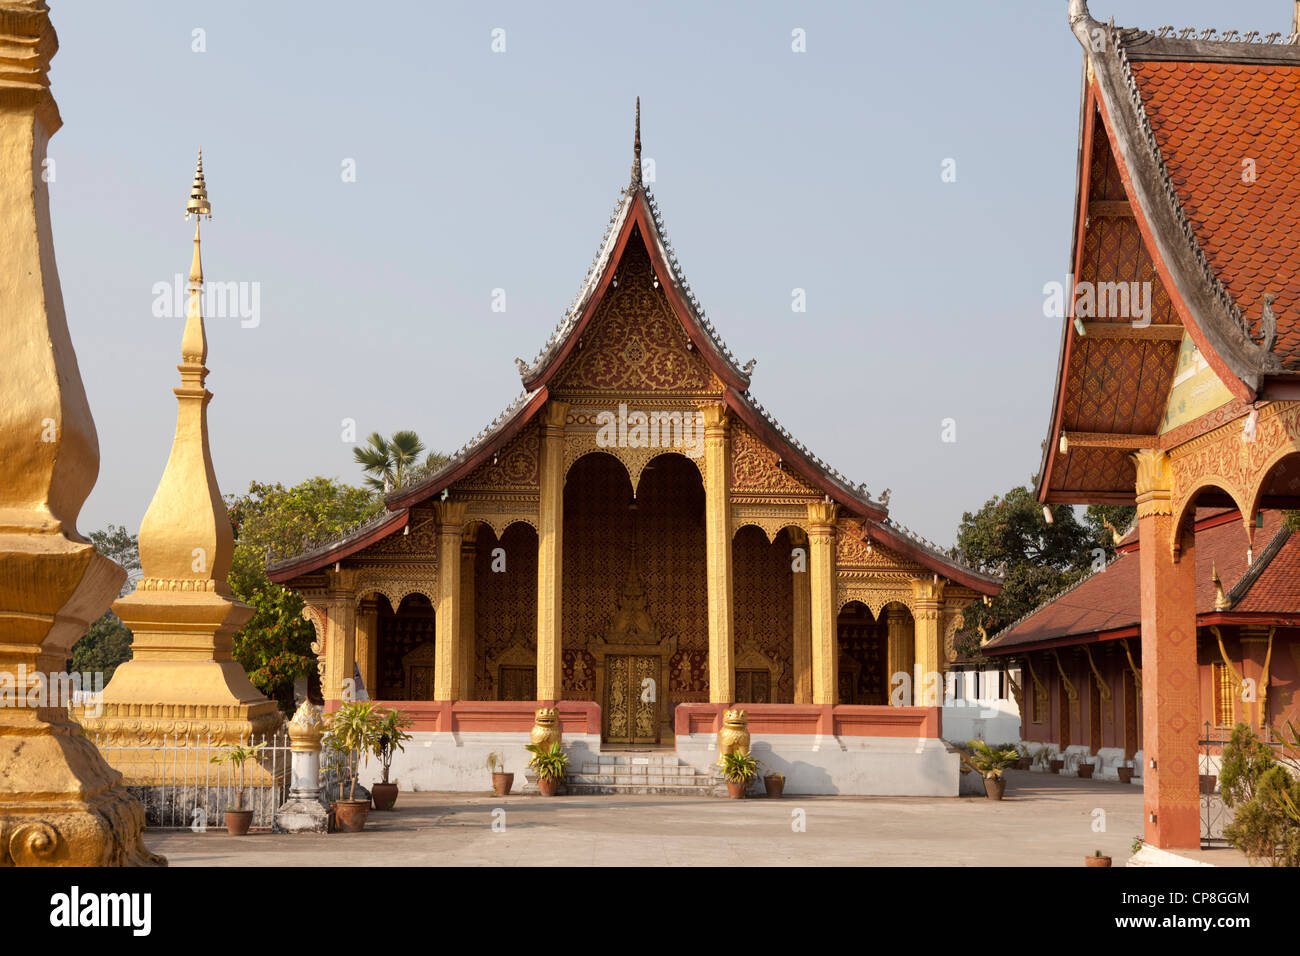 A multi-roofed building in the Sop Sickharam temple area, at Luang ...